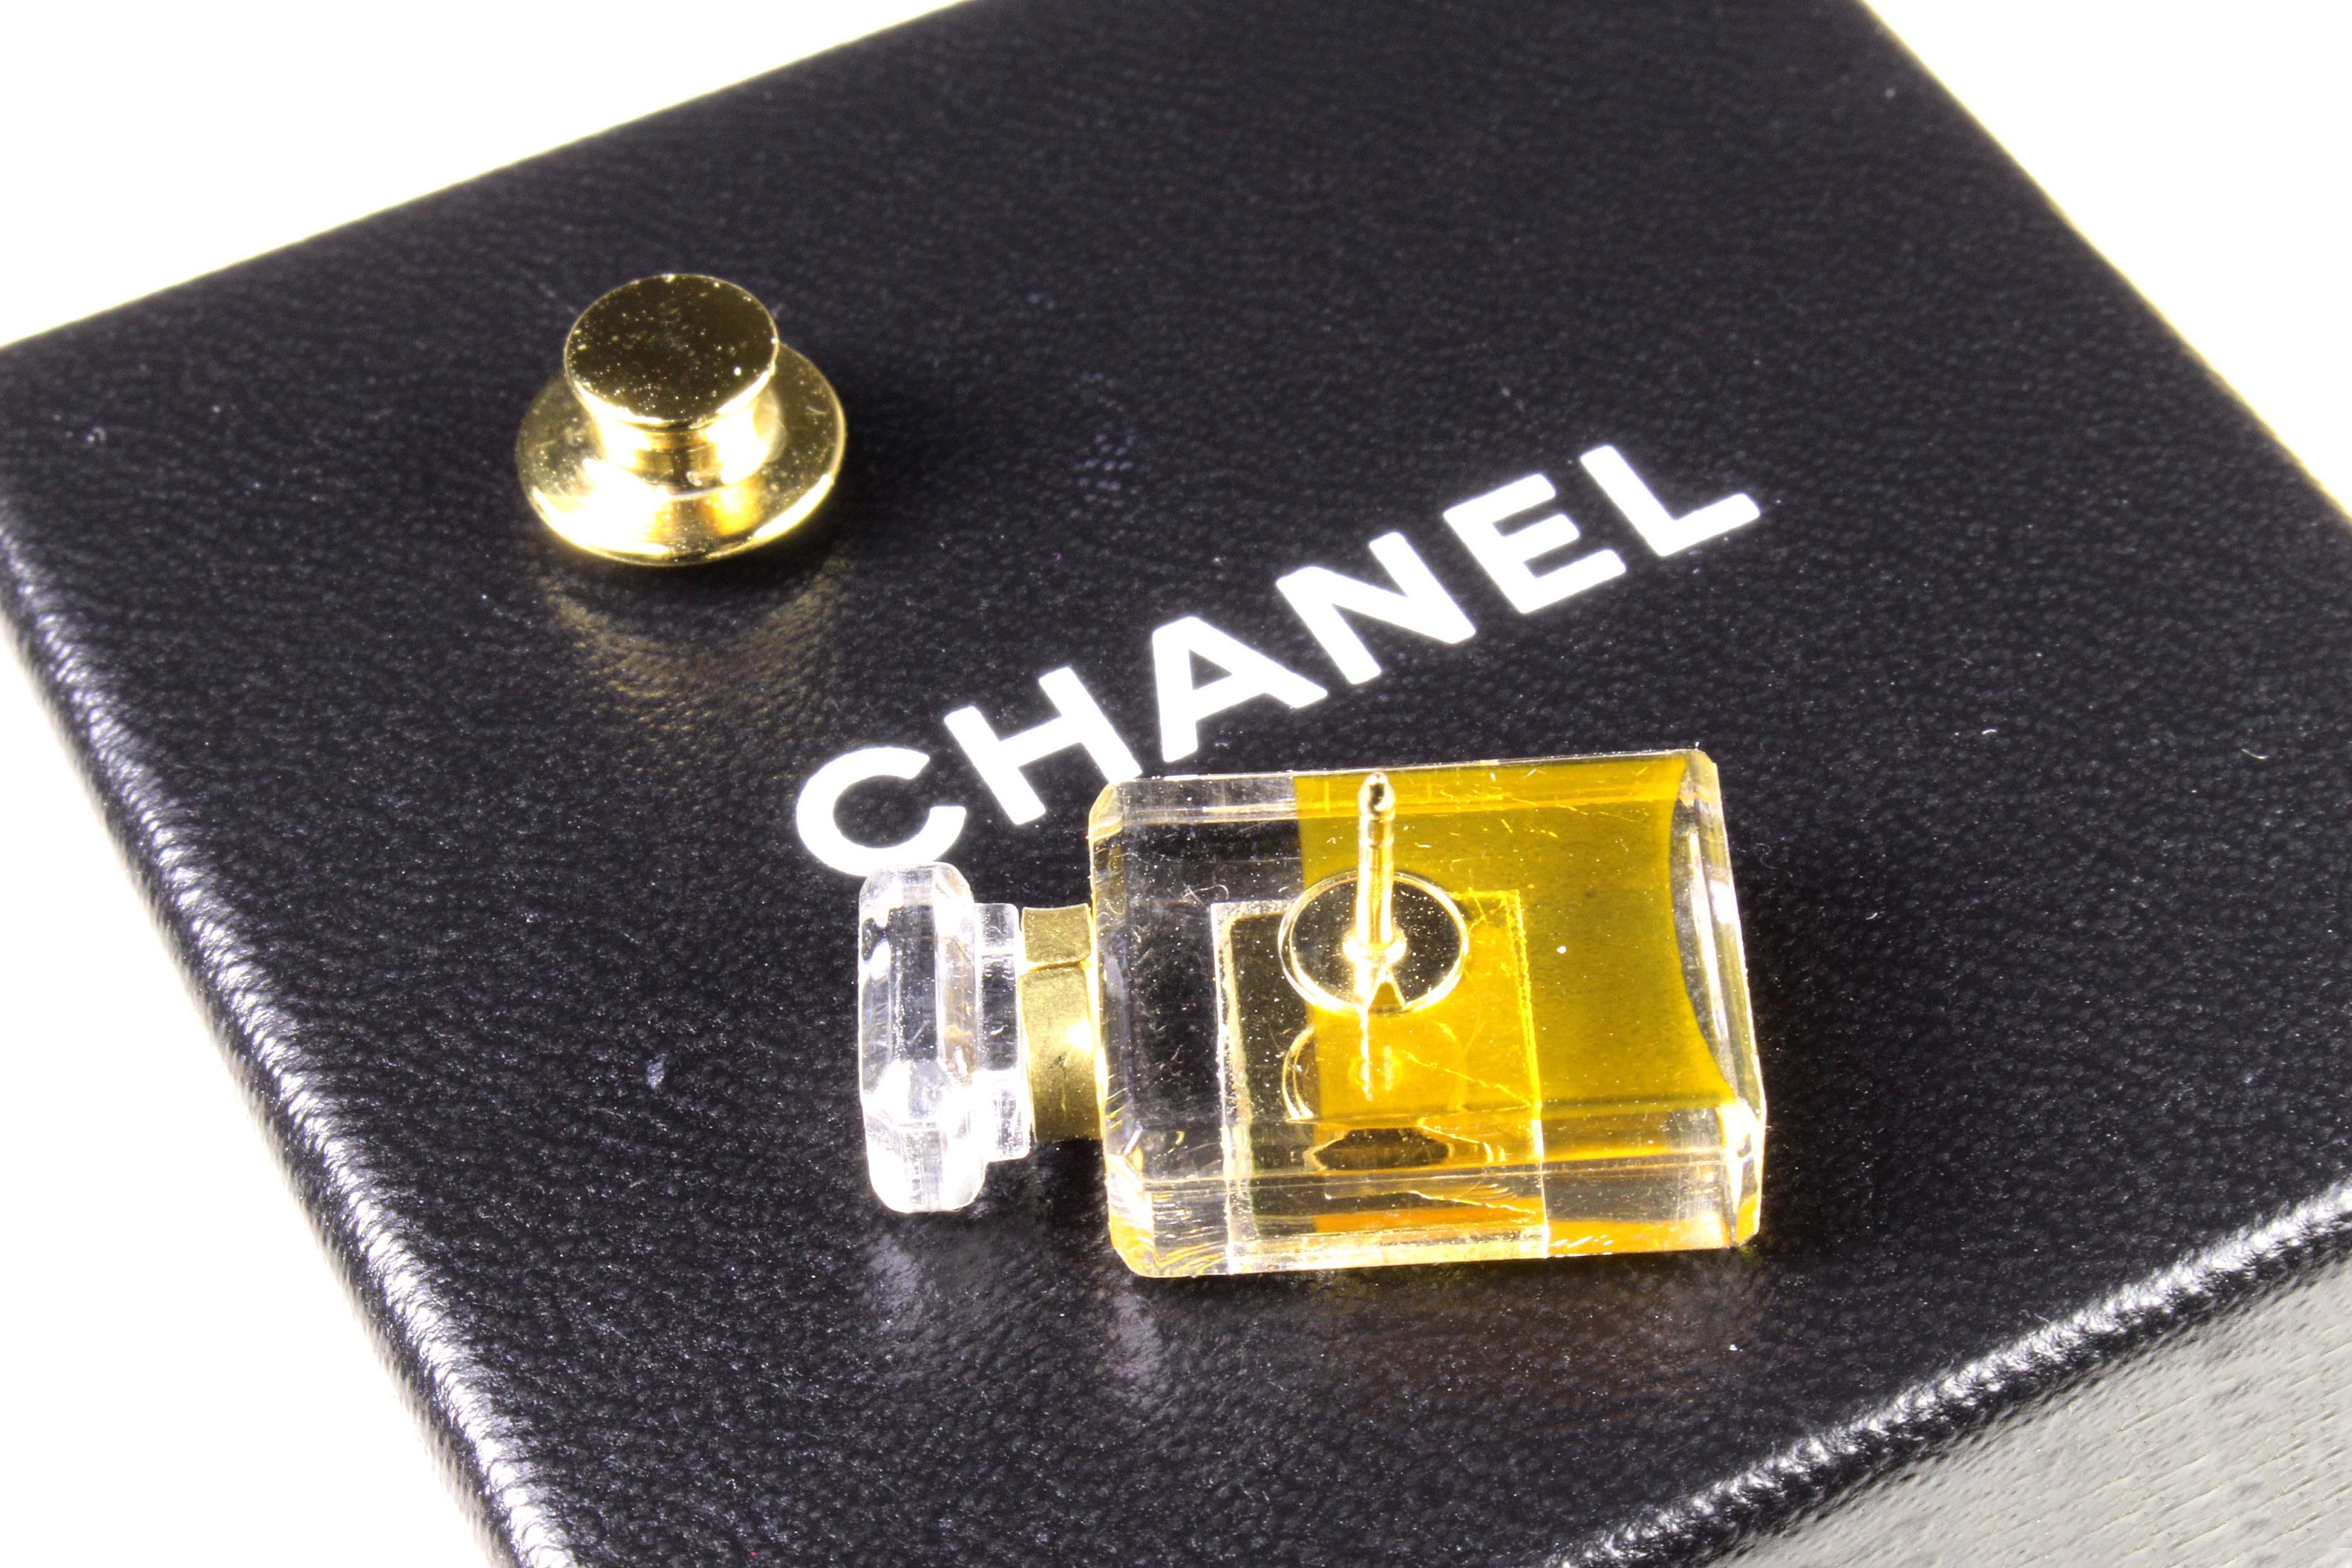 CHANEL Vintage Iconic No.5 Miniature Perfume Bottle Pin Brooch